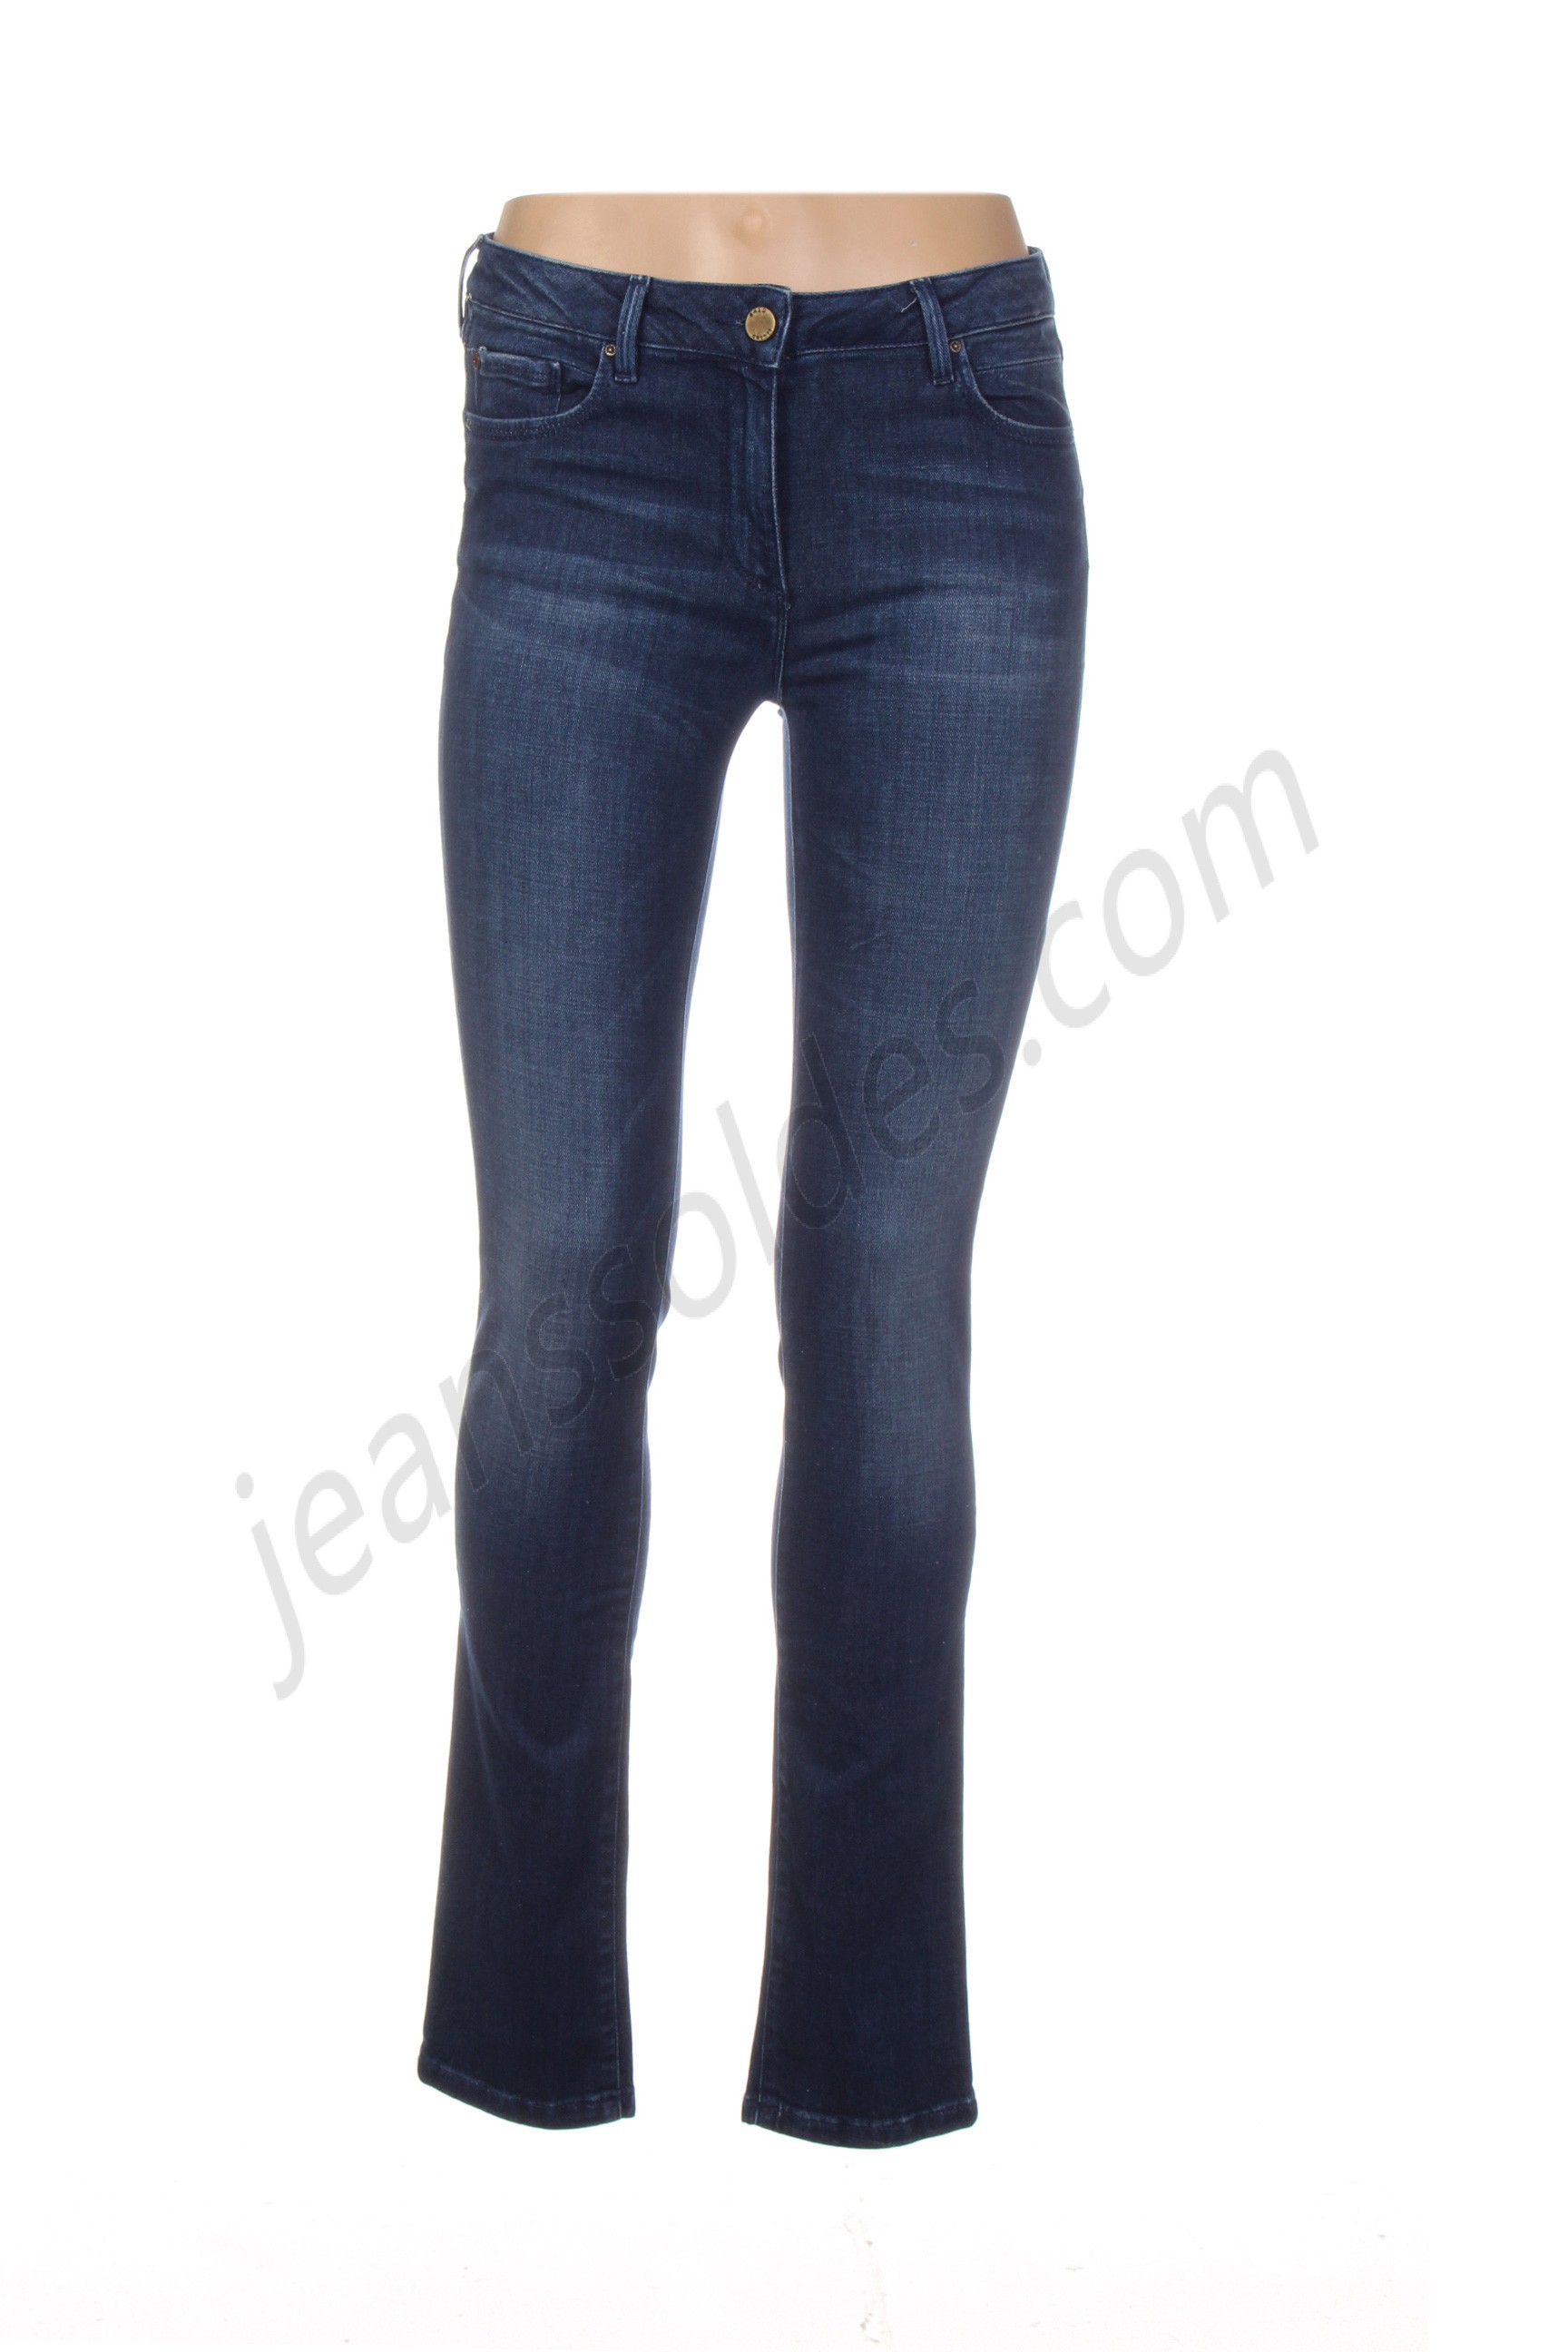 red legend-Jeans coupe slim prix d’amis - red legend-Jeans coupe slim prix d’amis